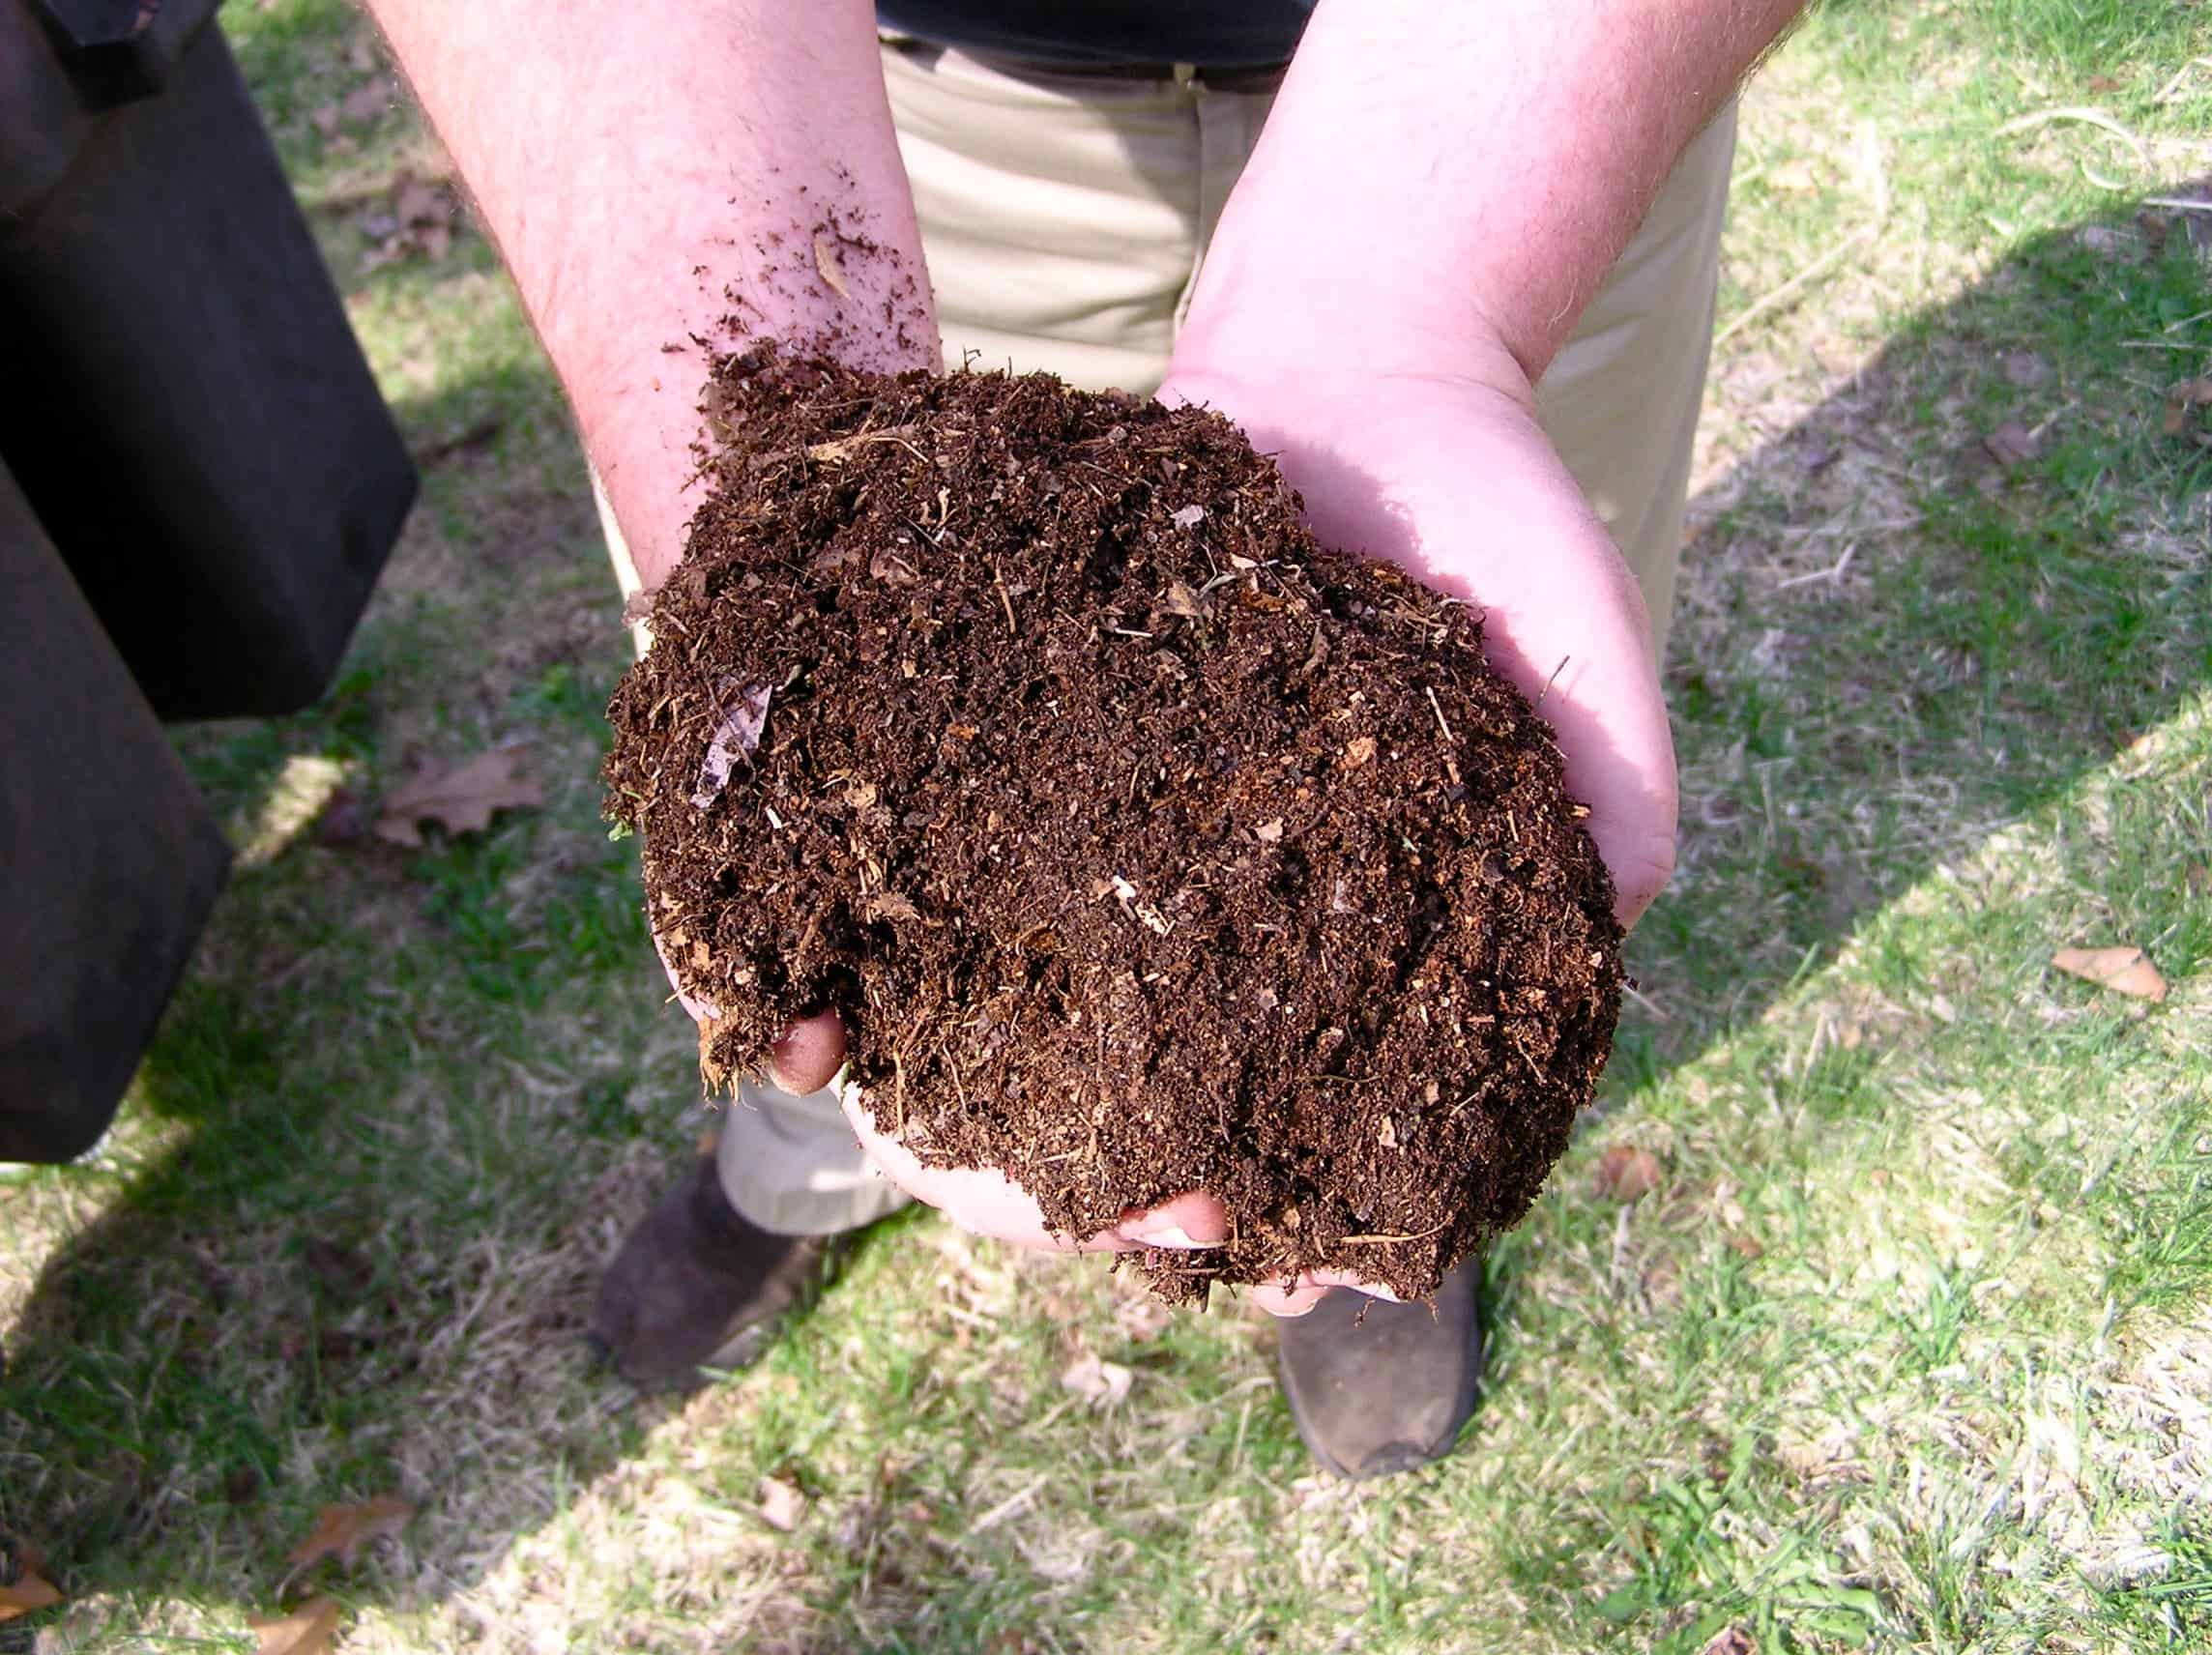 Compost is sustainable and easy to make. Photo by normanack.